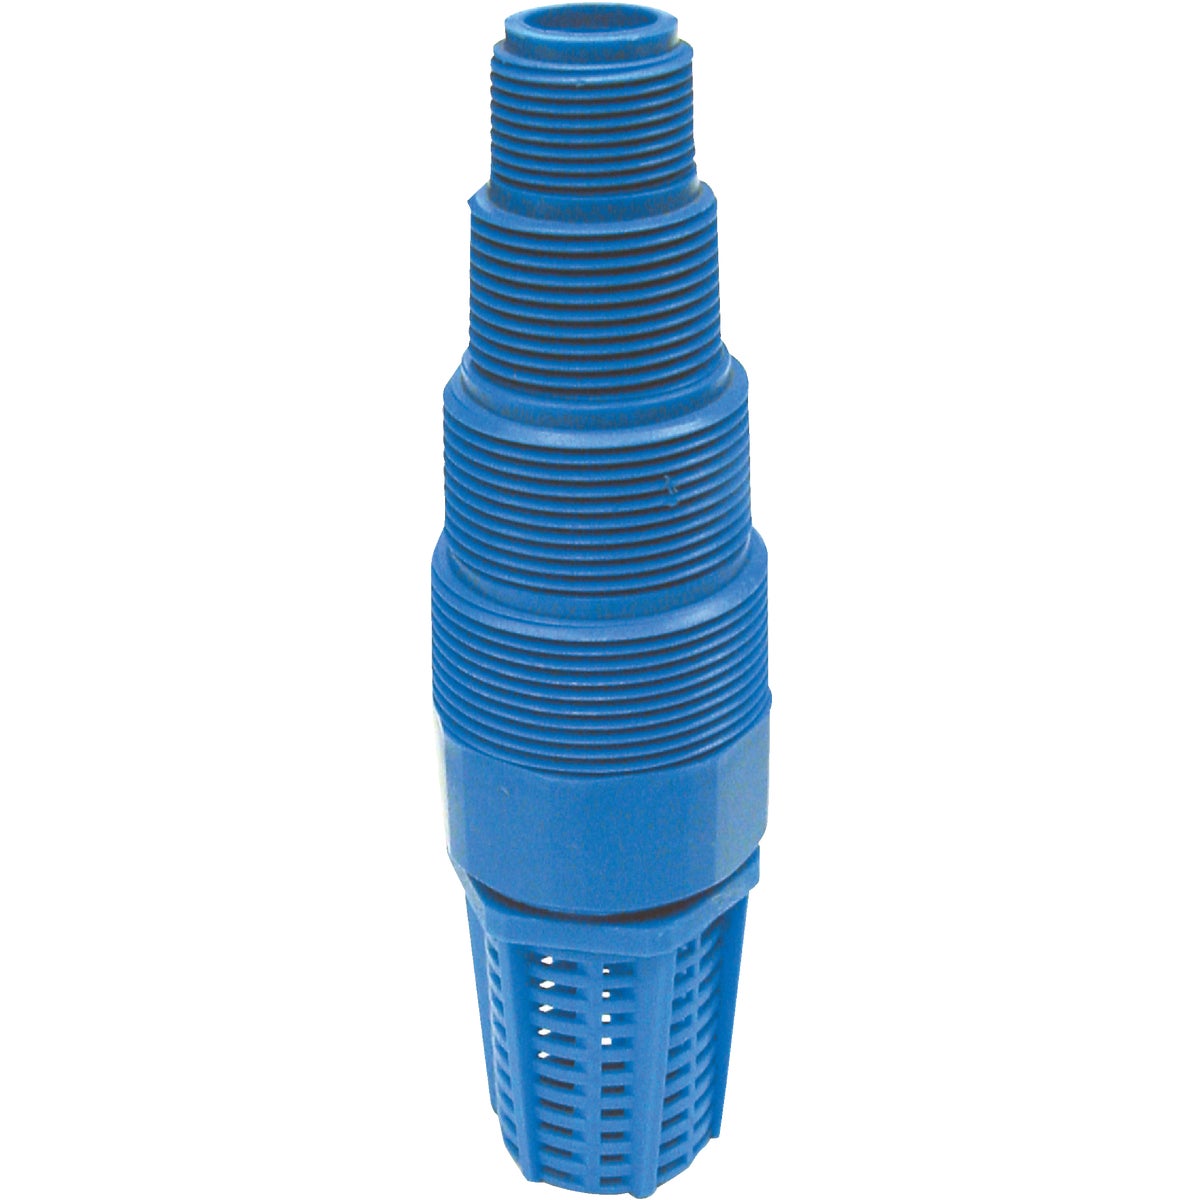 Item 491020, 1 valve fits 4 pipe sizes (3/4", 1", 1-1/4", and 1-1/2") Celcon material.